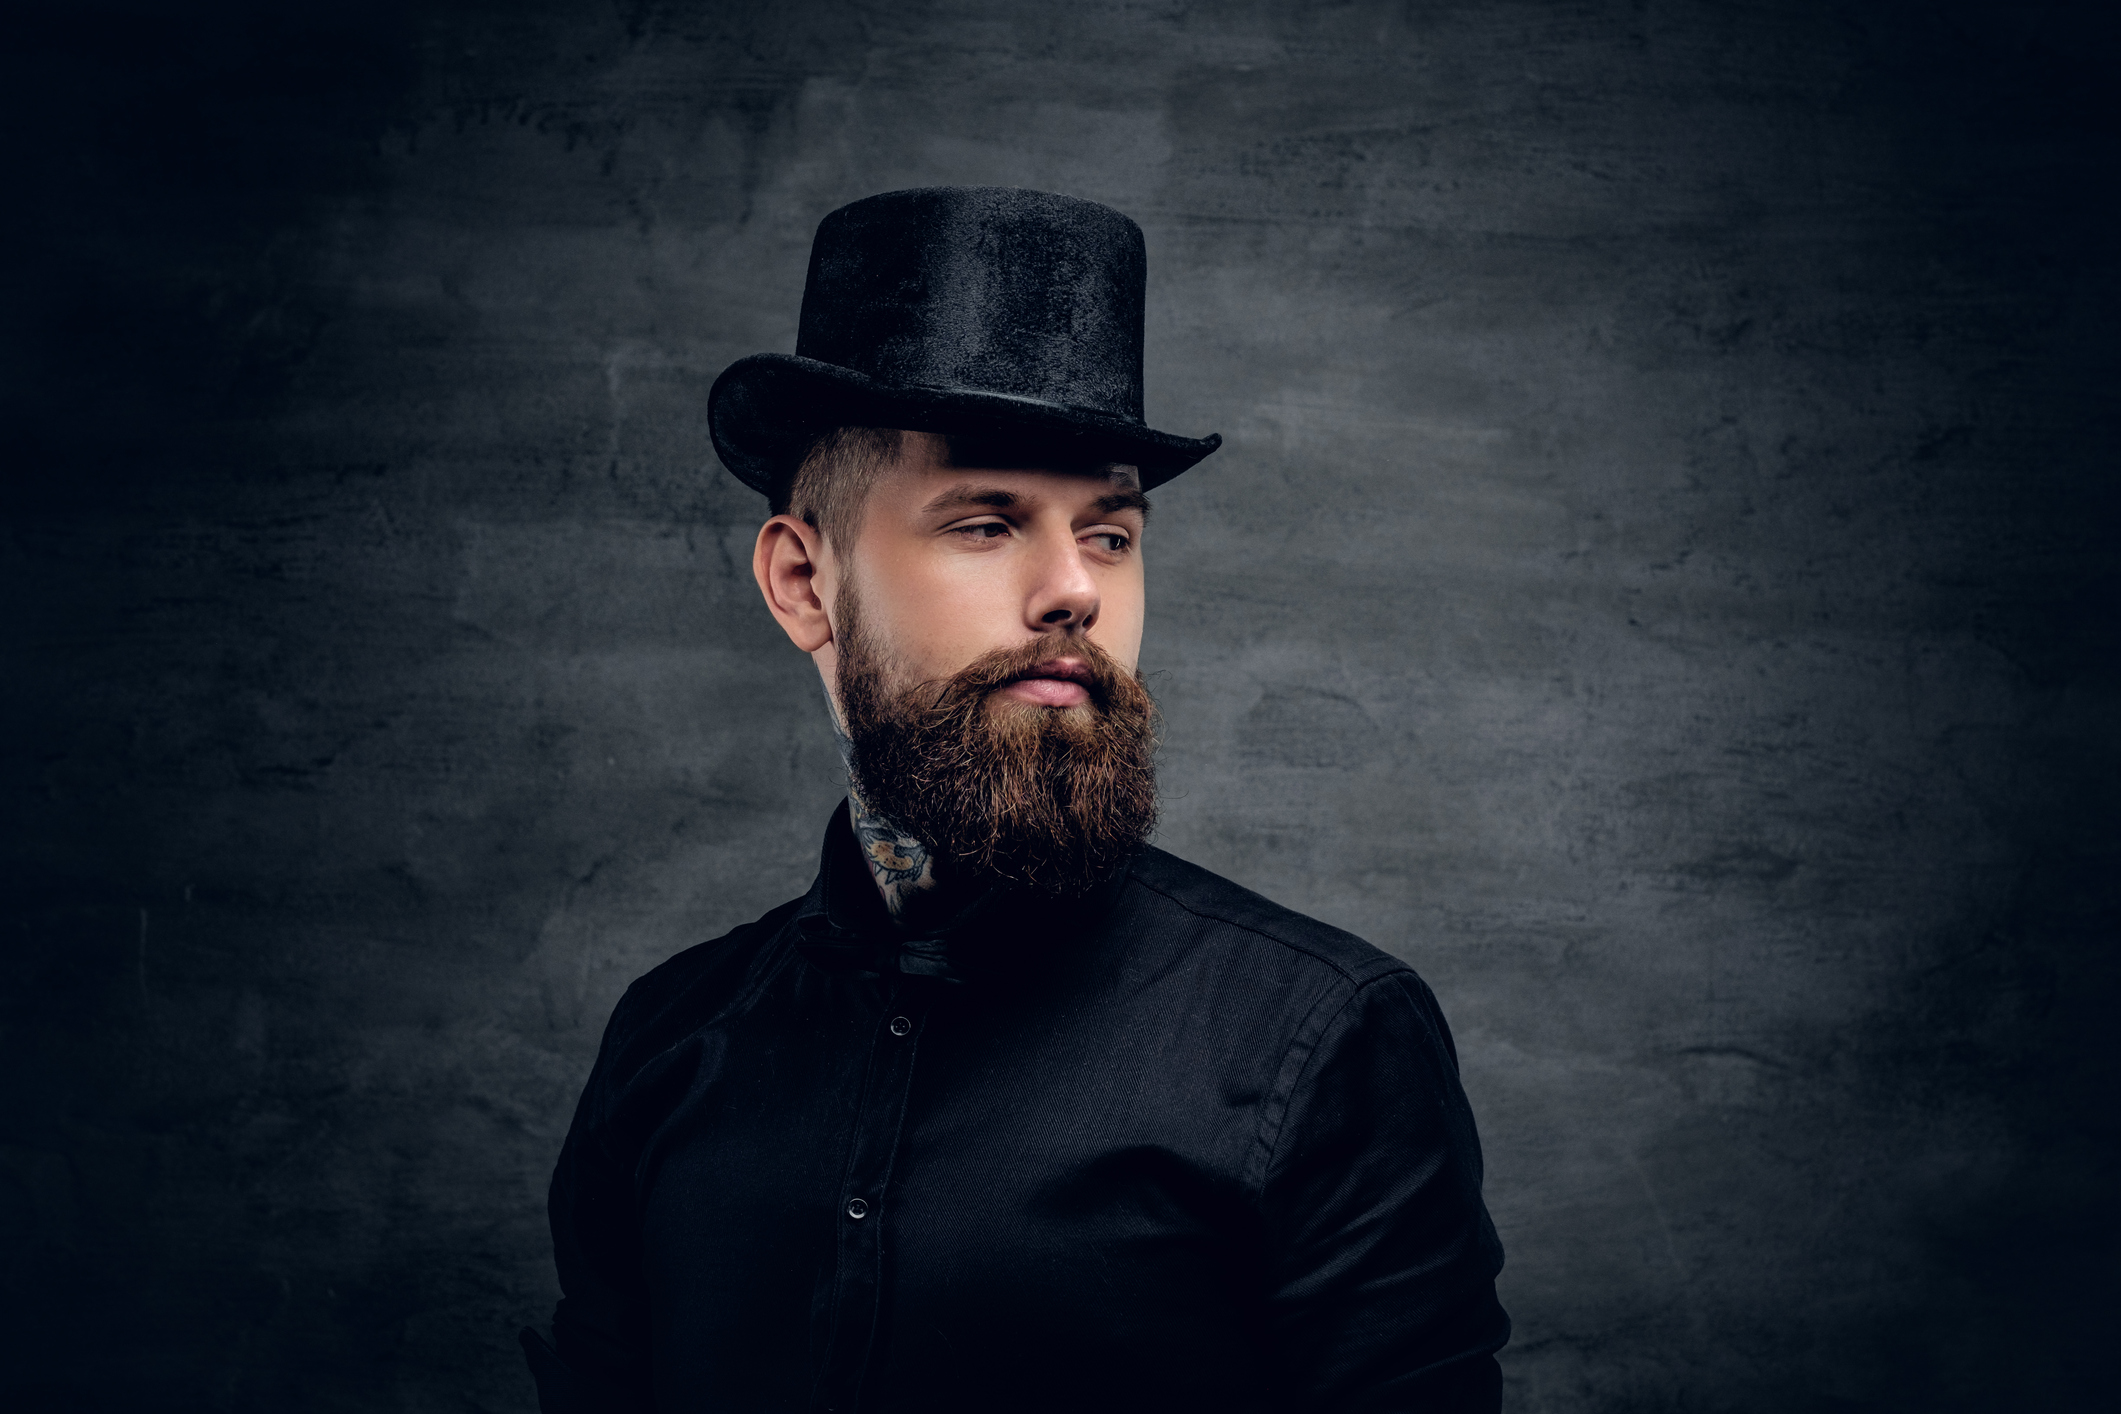 Derby, fedora, and more: The complete guide to men's hat styles - The Manual